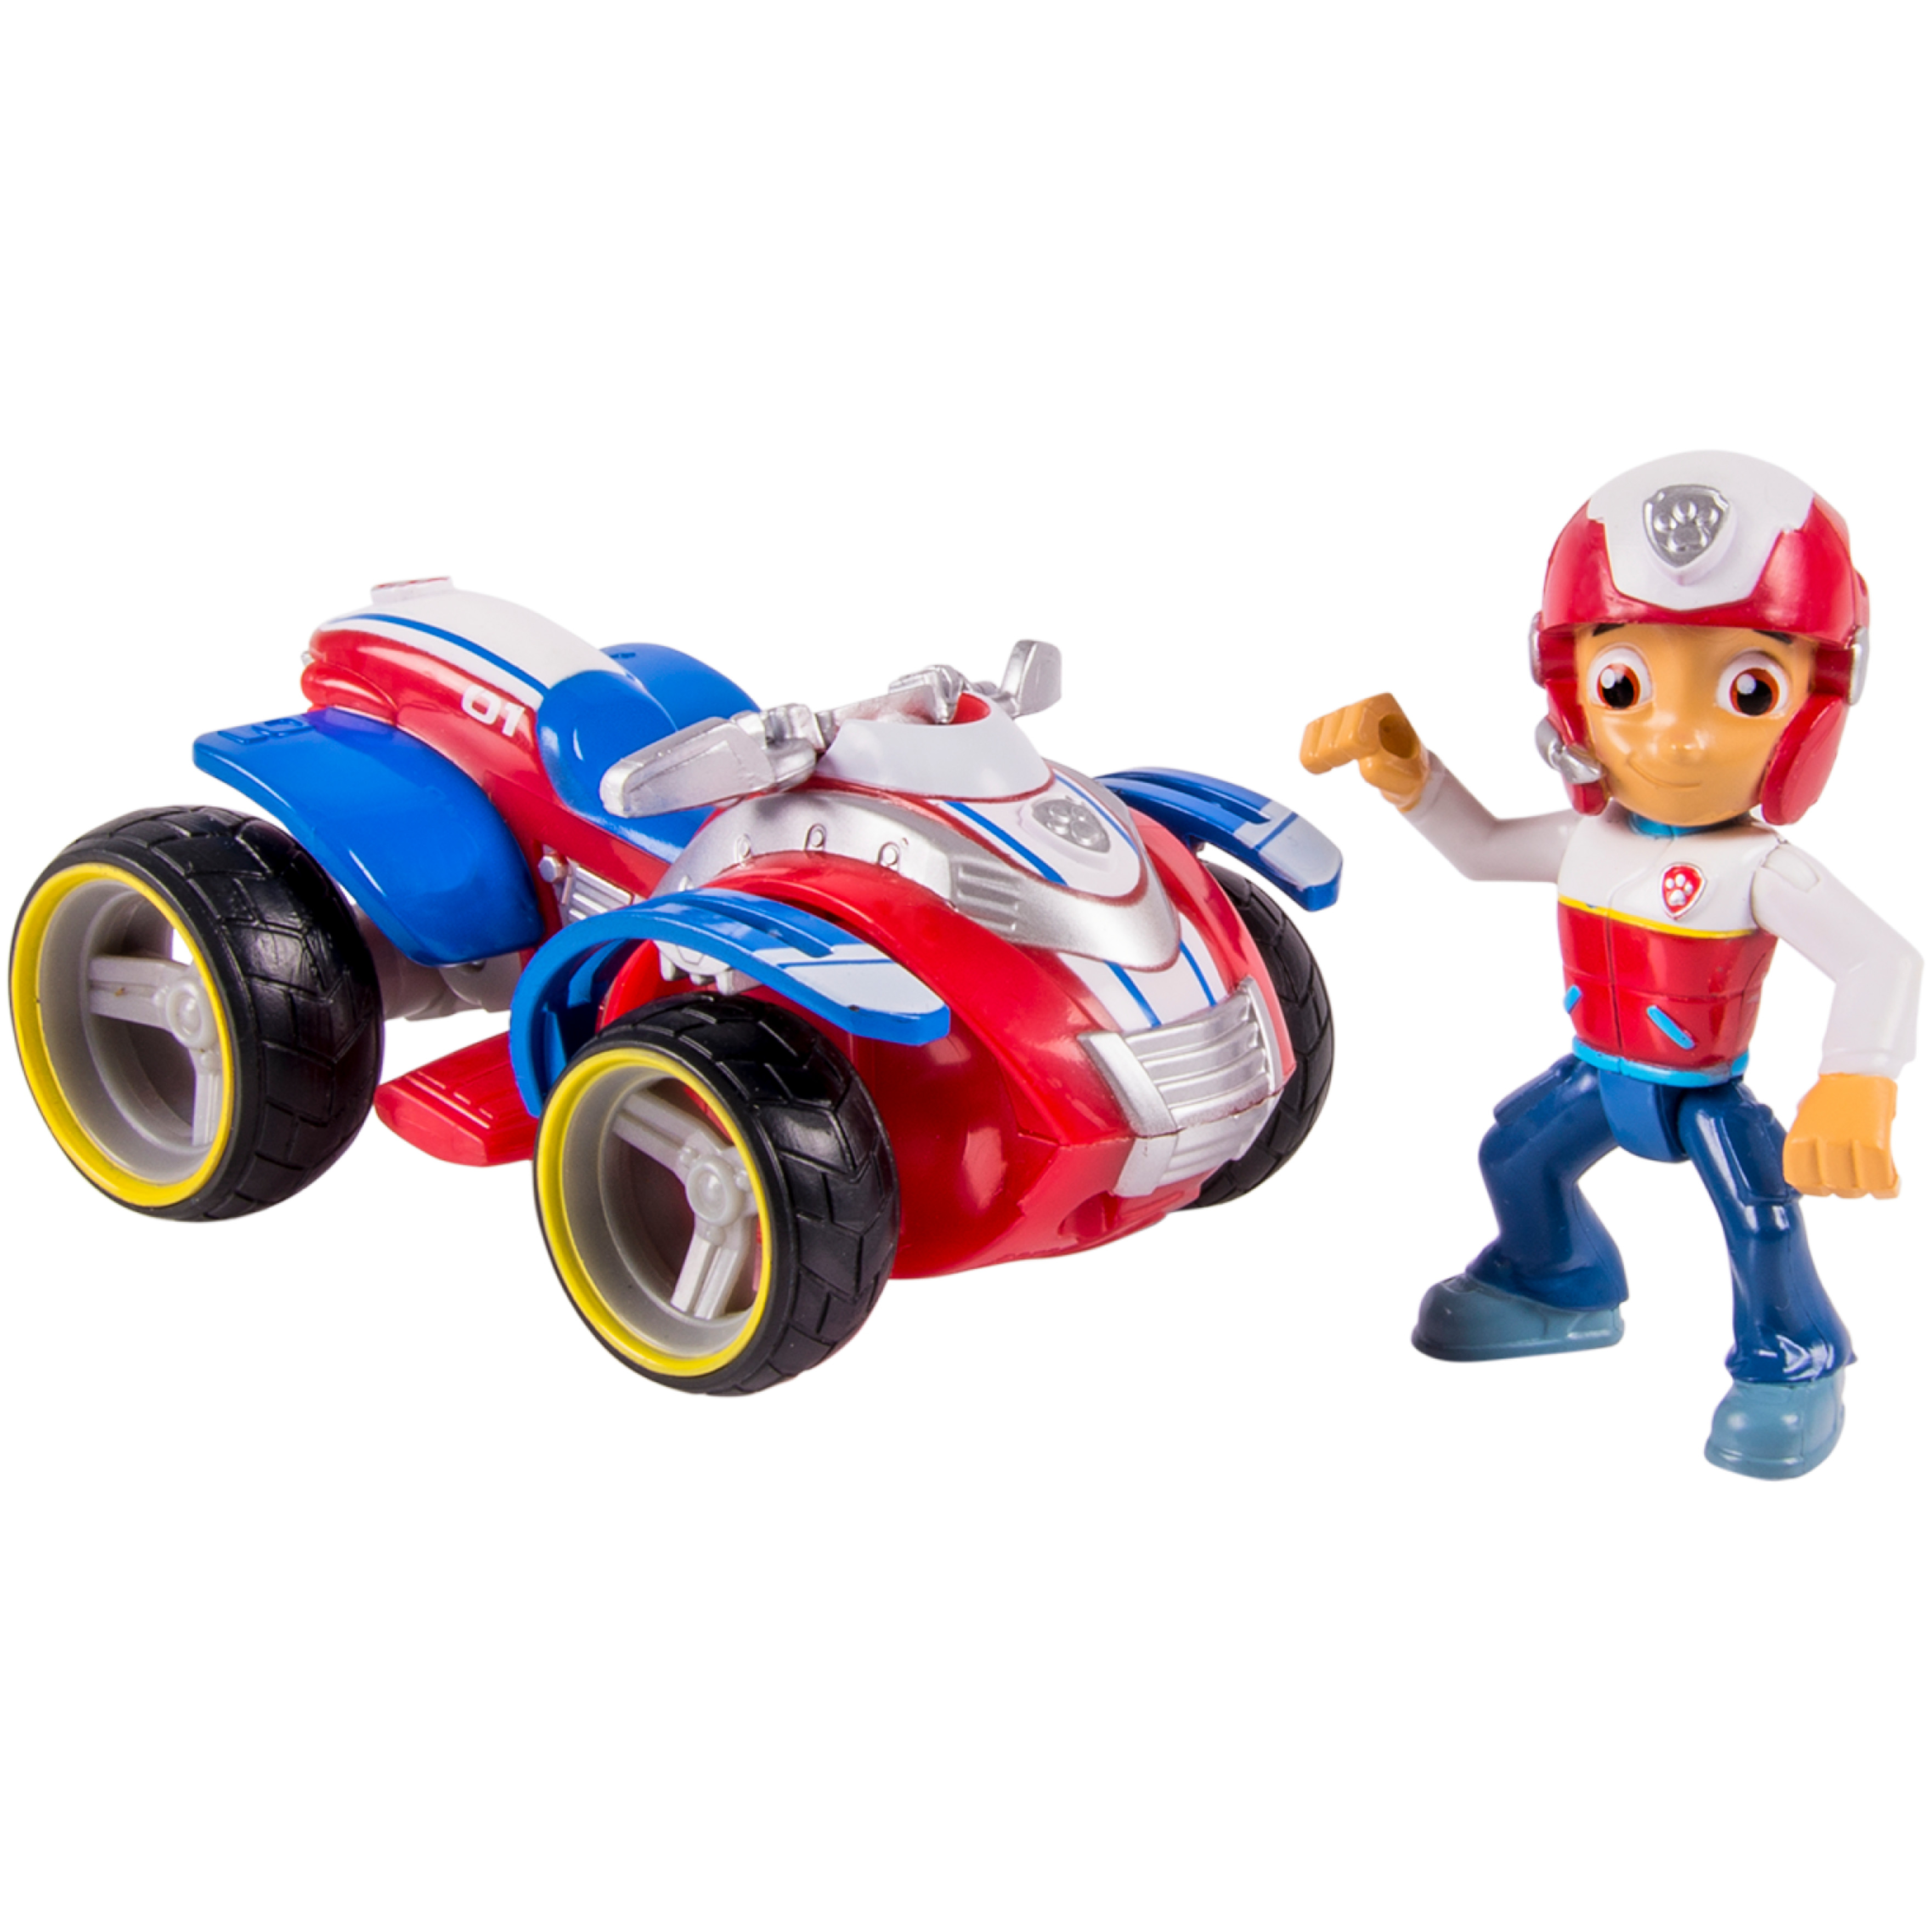 PAW Patrol Ryder's Rescue ATV, Vehicle and Figure, For Ages 3 and up - image 1 of 6